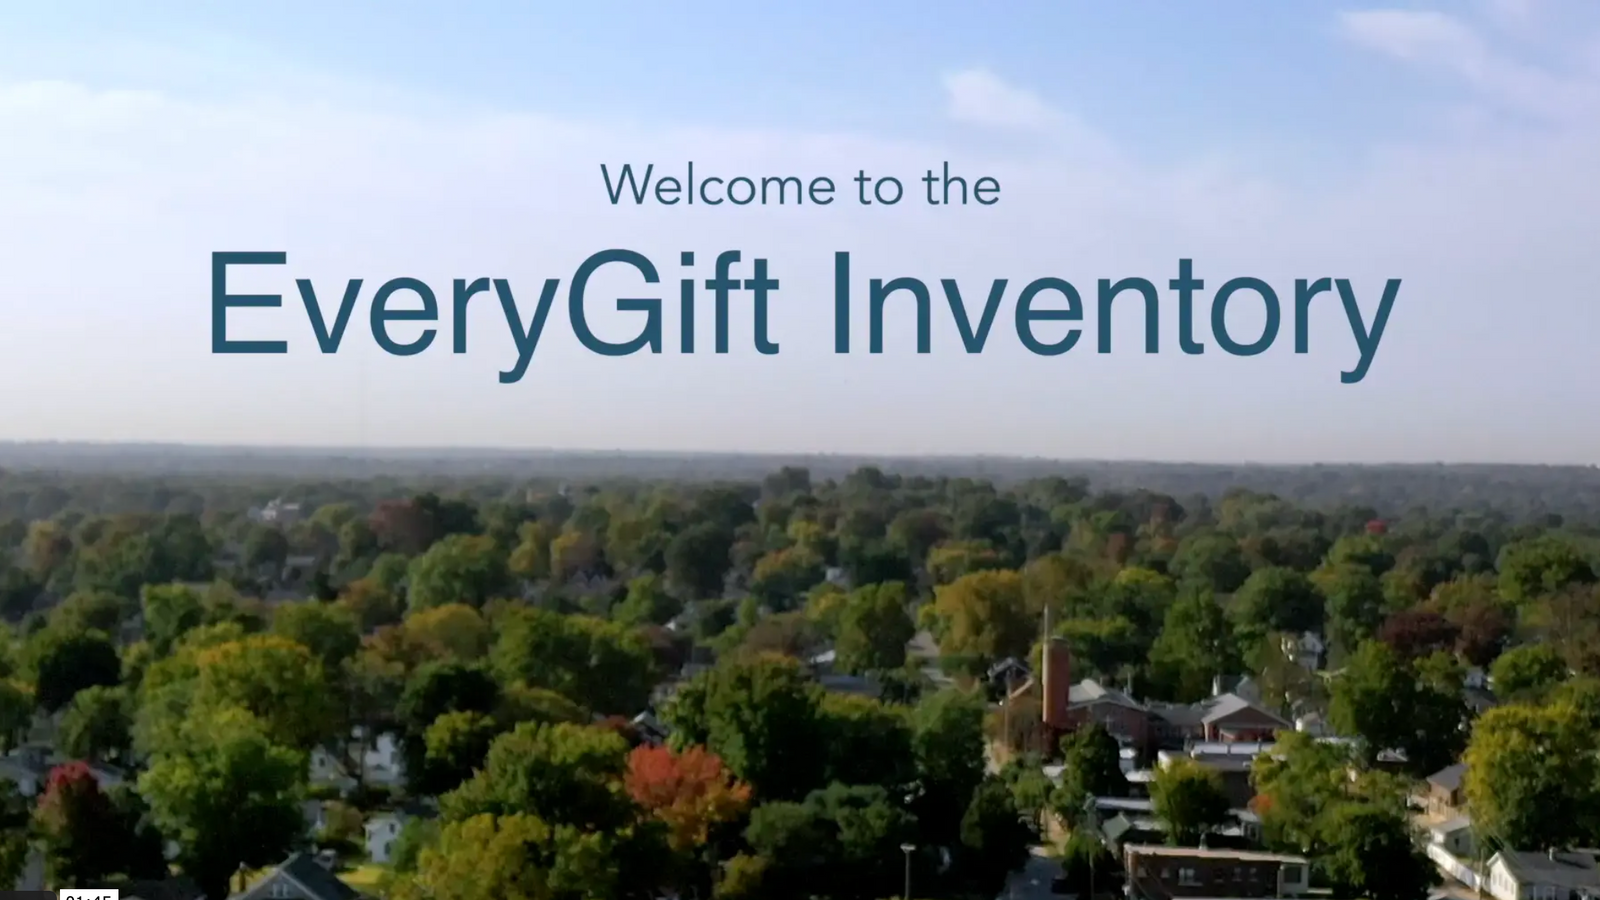 Welcome to the EveryGift Inventory